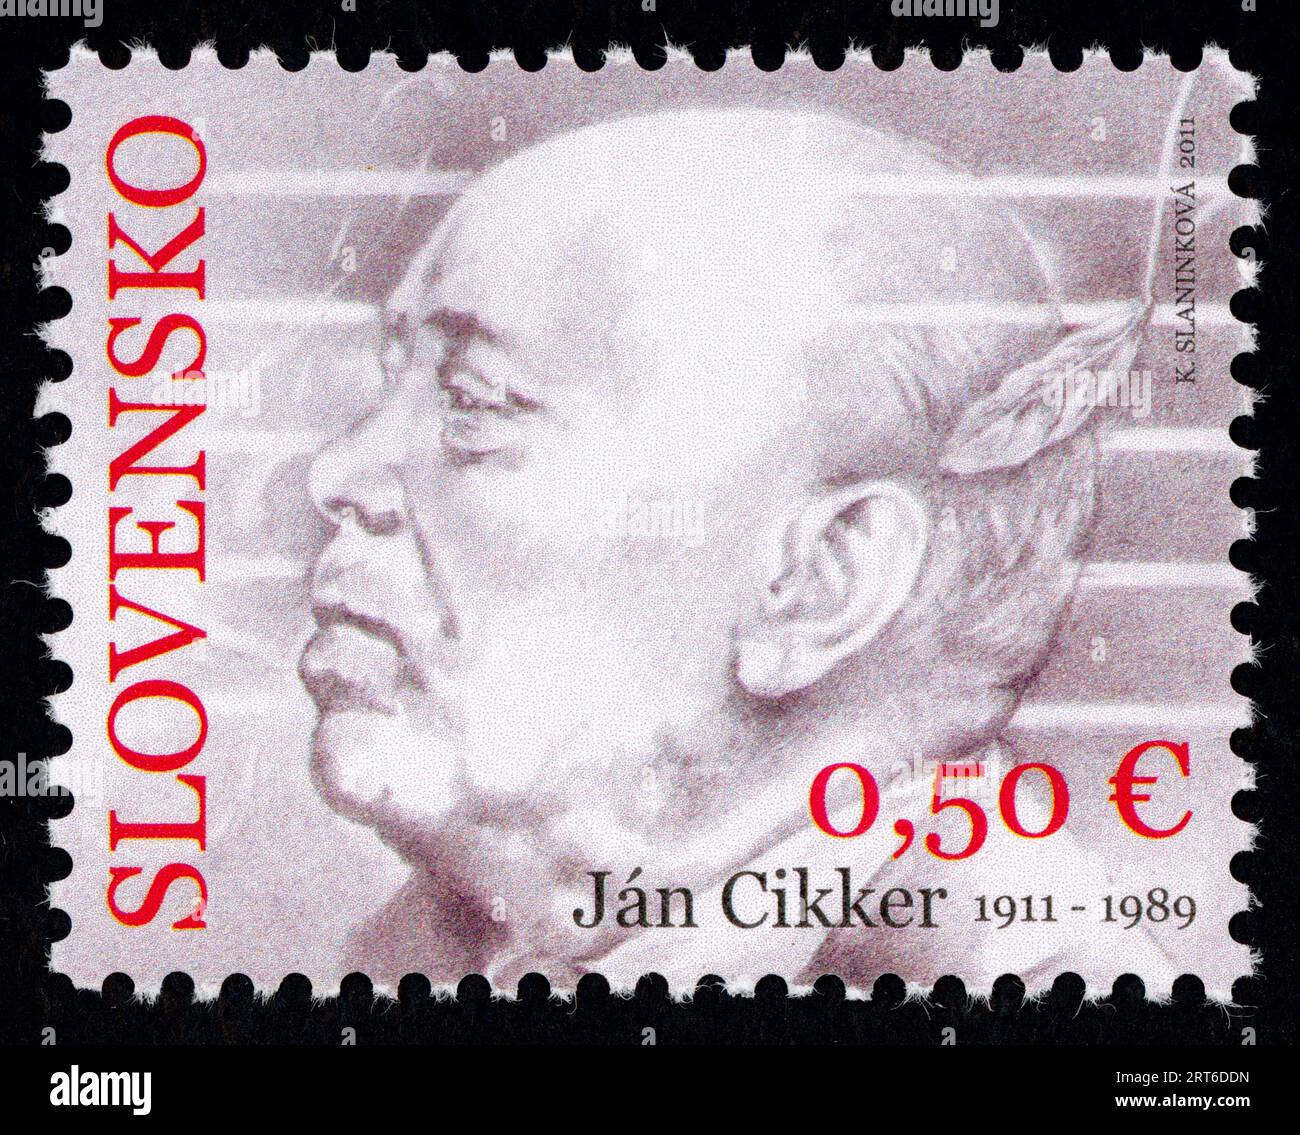 Ján Cikker (1911 – 1989). Postage stamp issued in Slovakia in 2011. Ján Cikker was a Slovak composer, a leading exponent of modern Slovak classical music. He was awarded the title National Artist in Slovakia, the Herder Prize (1966) and the IMC-UNESCO International Music Prize (1979). Stock Photo